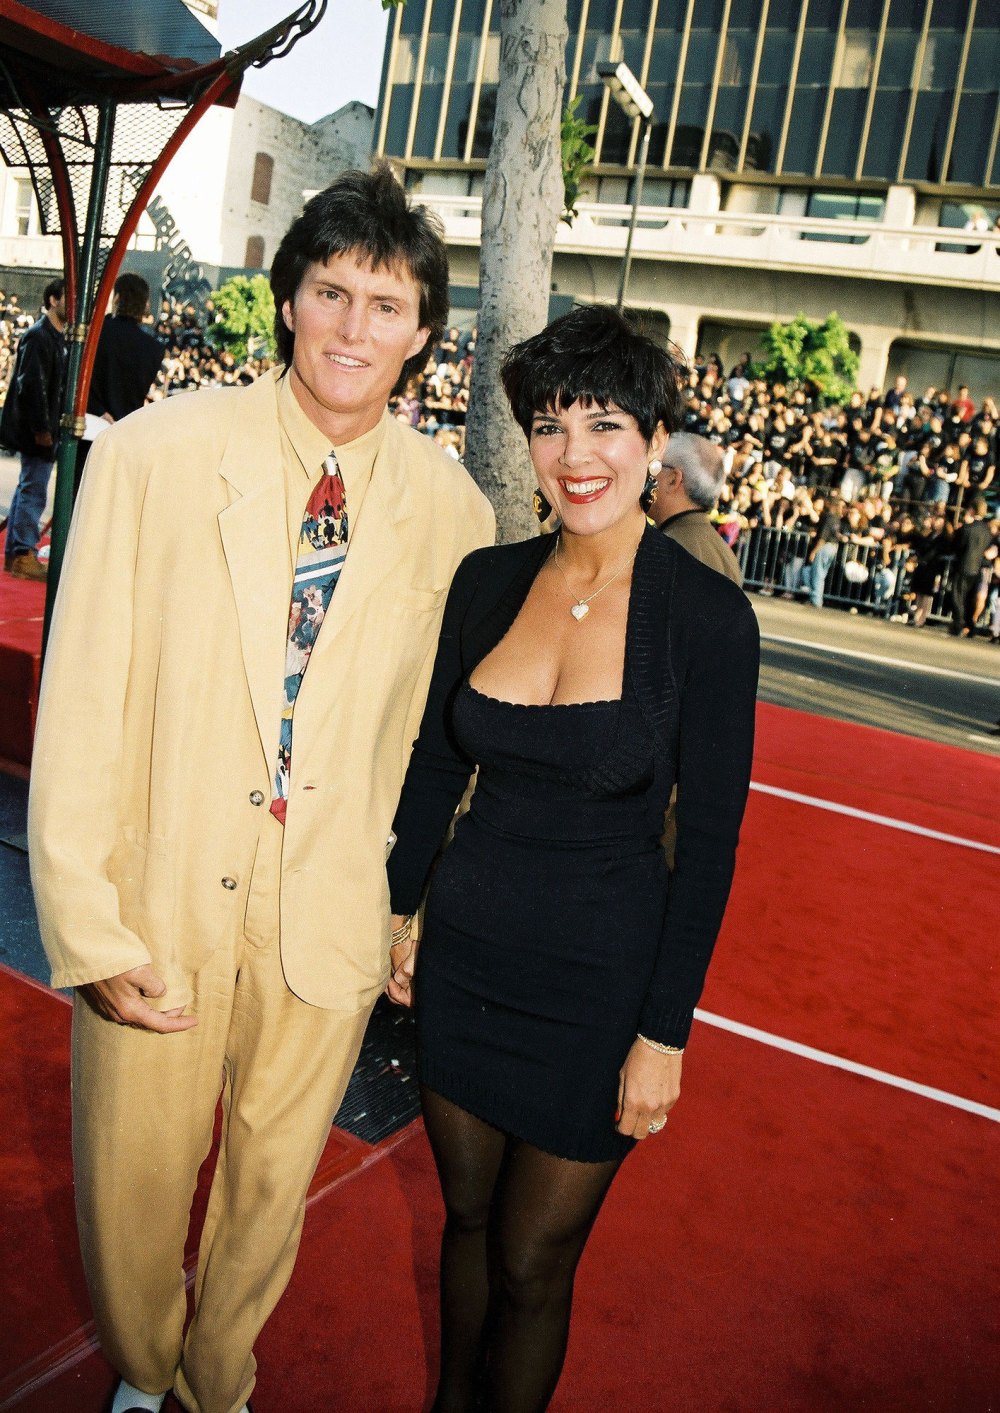 Kris, Bruce Jenner Announce Their Separation on Keeping Up With the Kardashians Season 9 Premiere